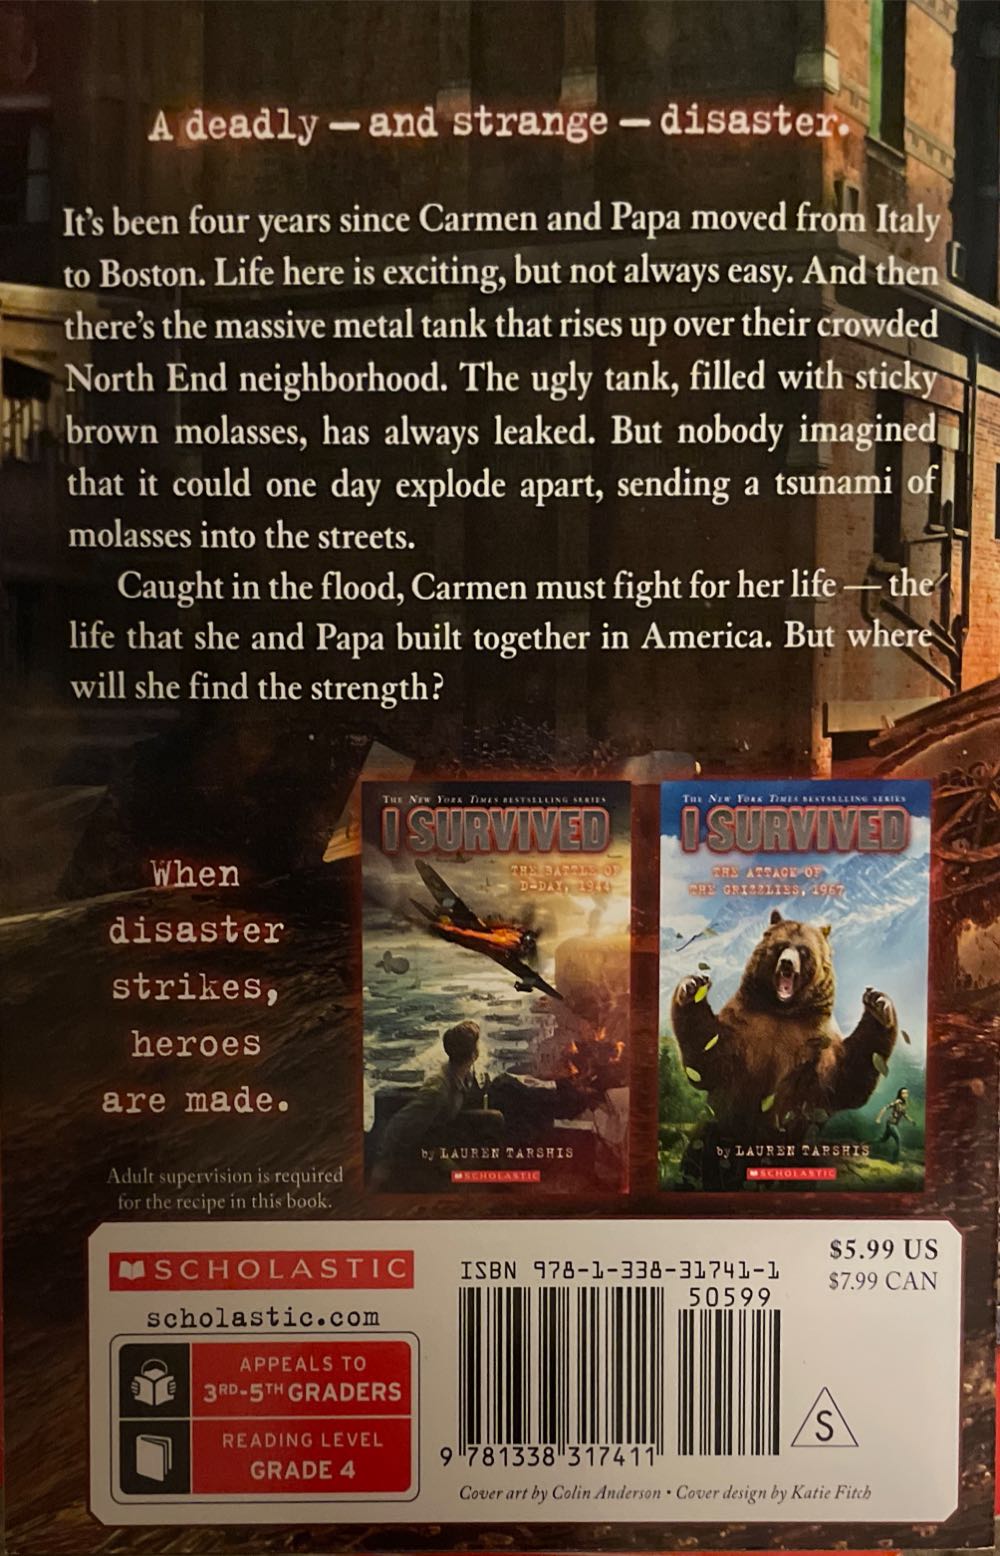 I Survived #19: The Great Molasses Flood, 1919 - Lauren Tarshis (Scholastic Paperbacks - Paperback) book collectible [Barcode 9781338317411] - Main Image 2